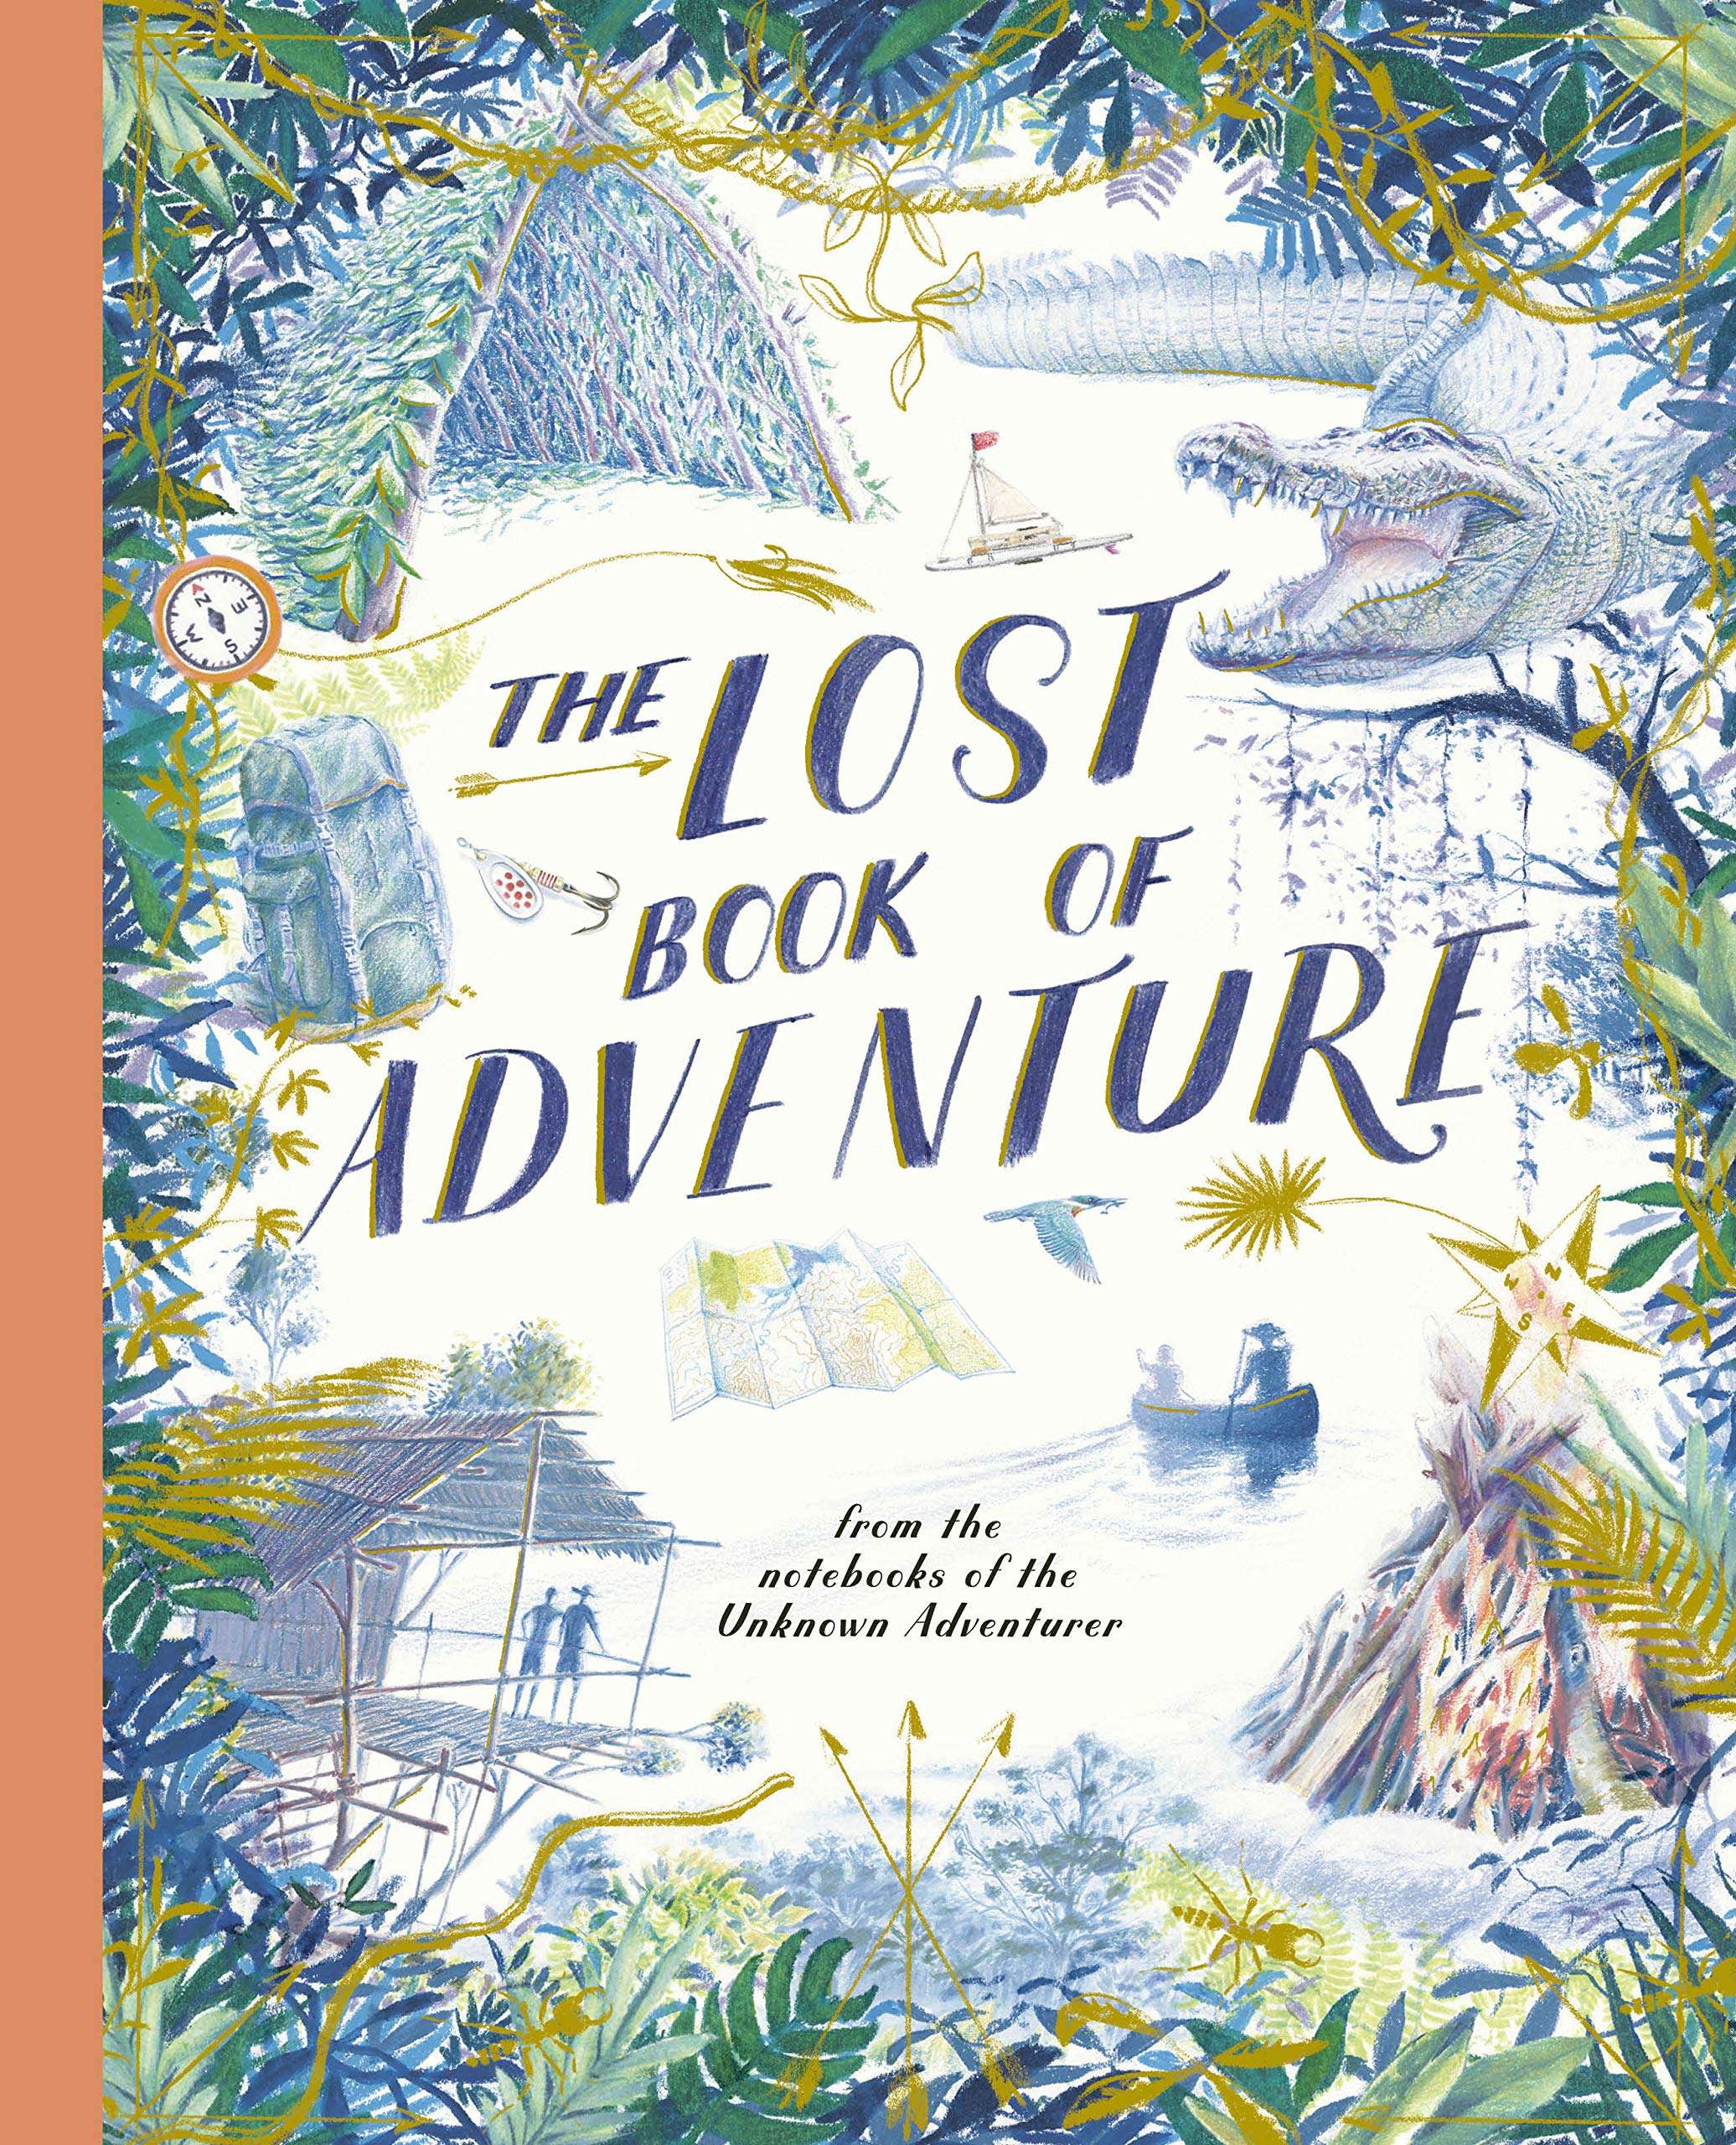 Our TOP Five… History Books (for kids) - The Lost Book of Adventure: from the notebooks of the Unknown Adventurer by Teddy Keen